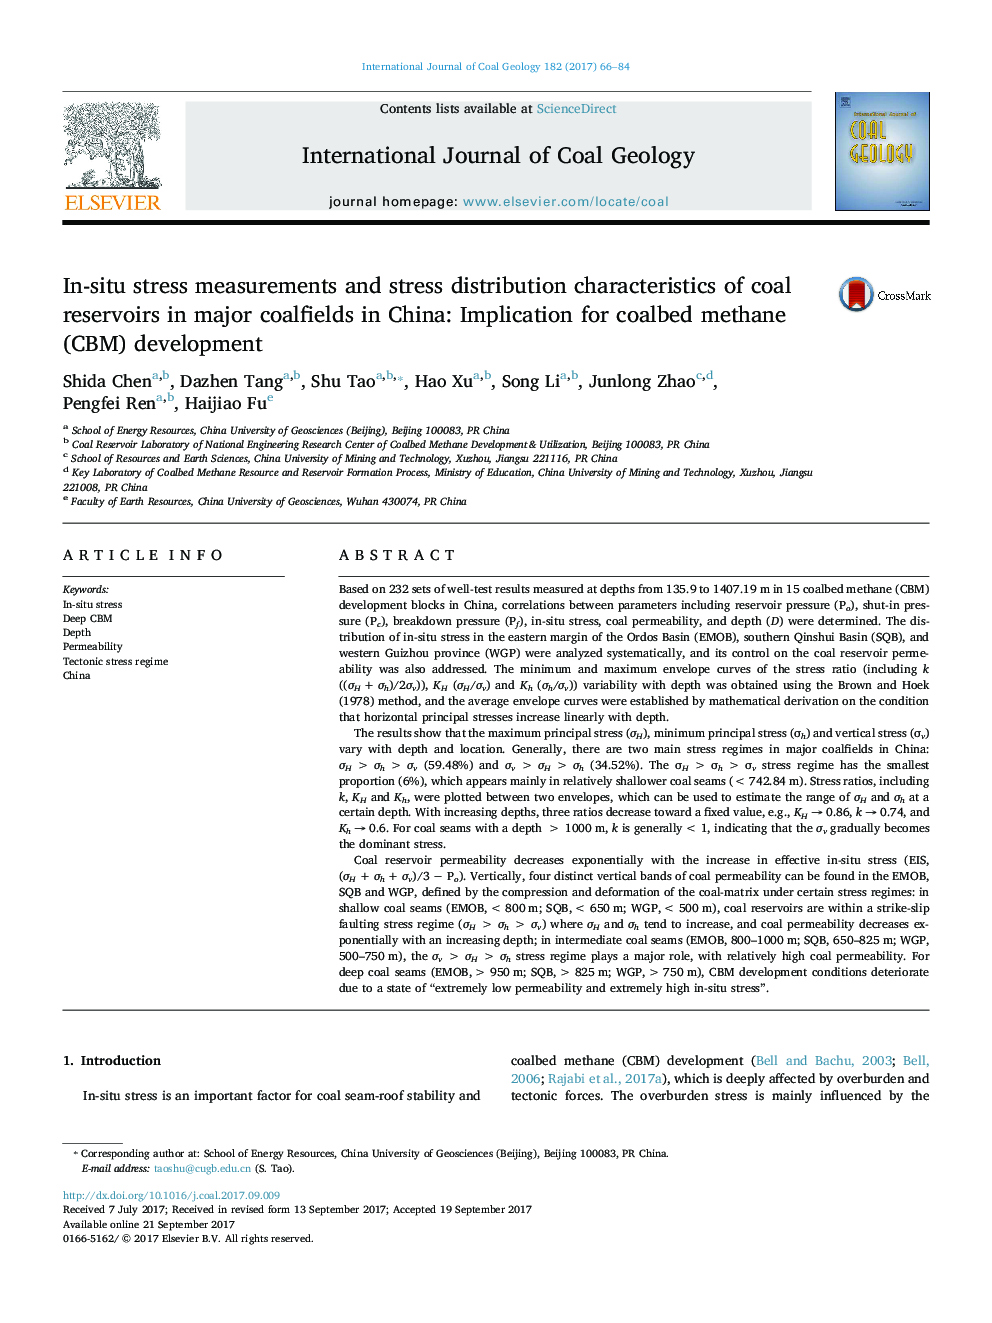 In-situ stress measurements and stress distribution characteristics of coal reservoirs in major coalfields in China: Implication for coalbed methane (CBM) development